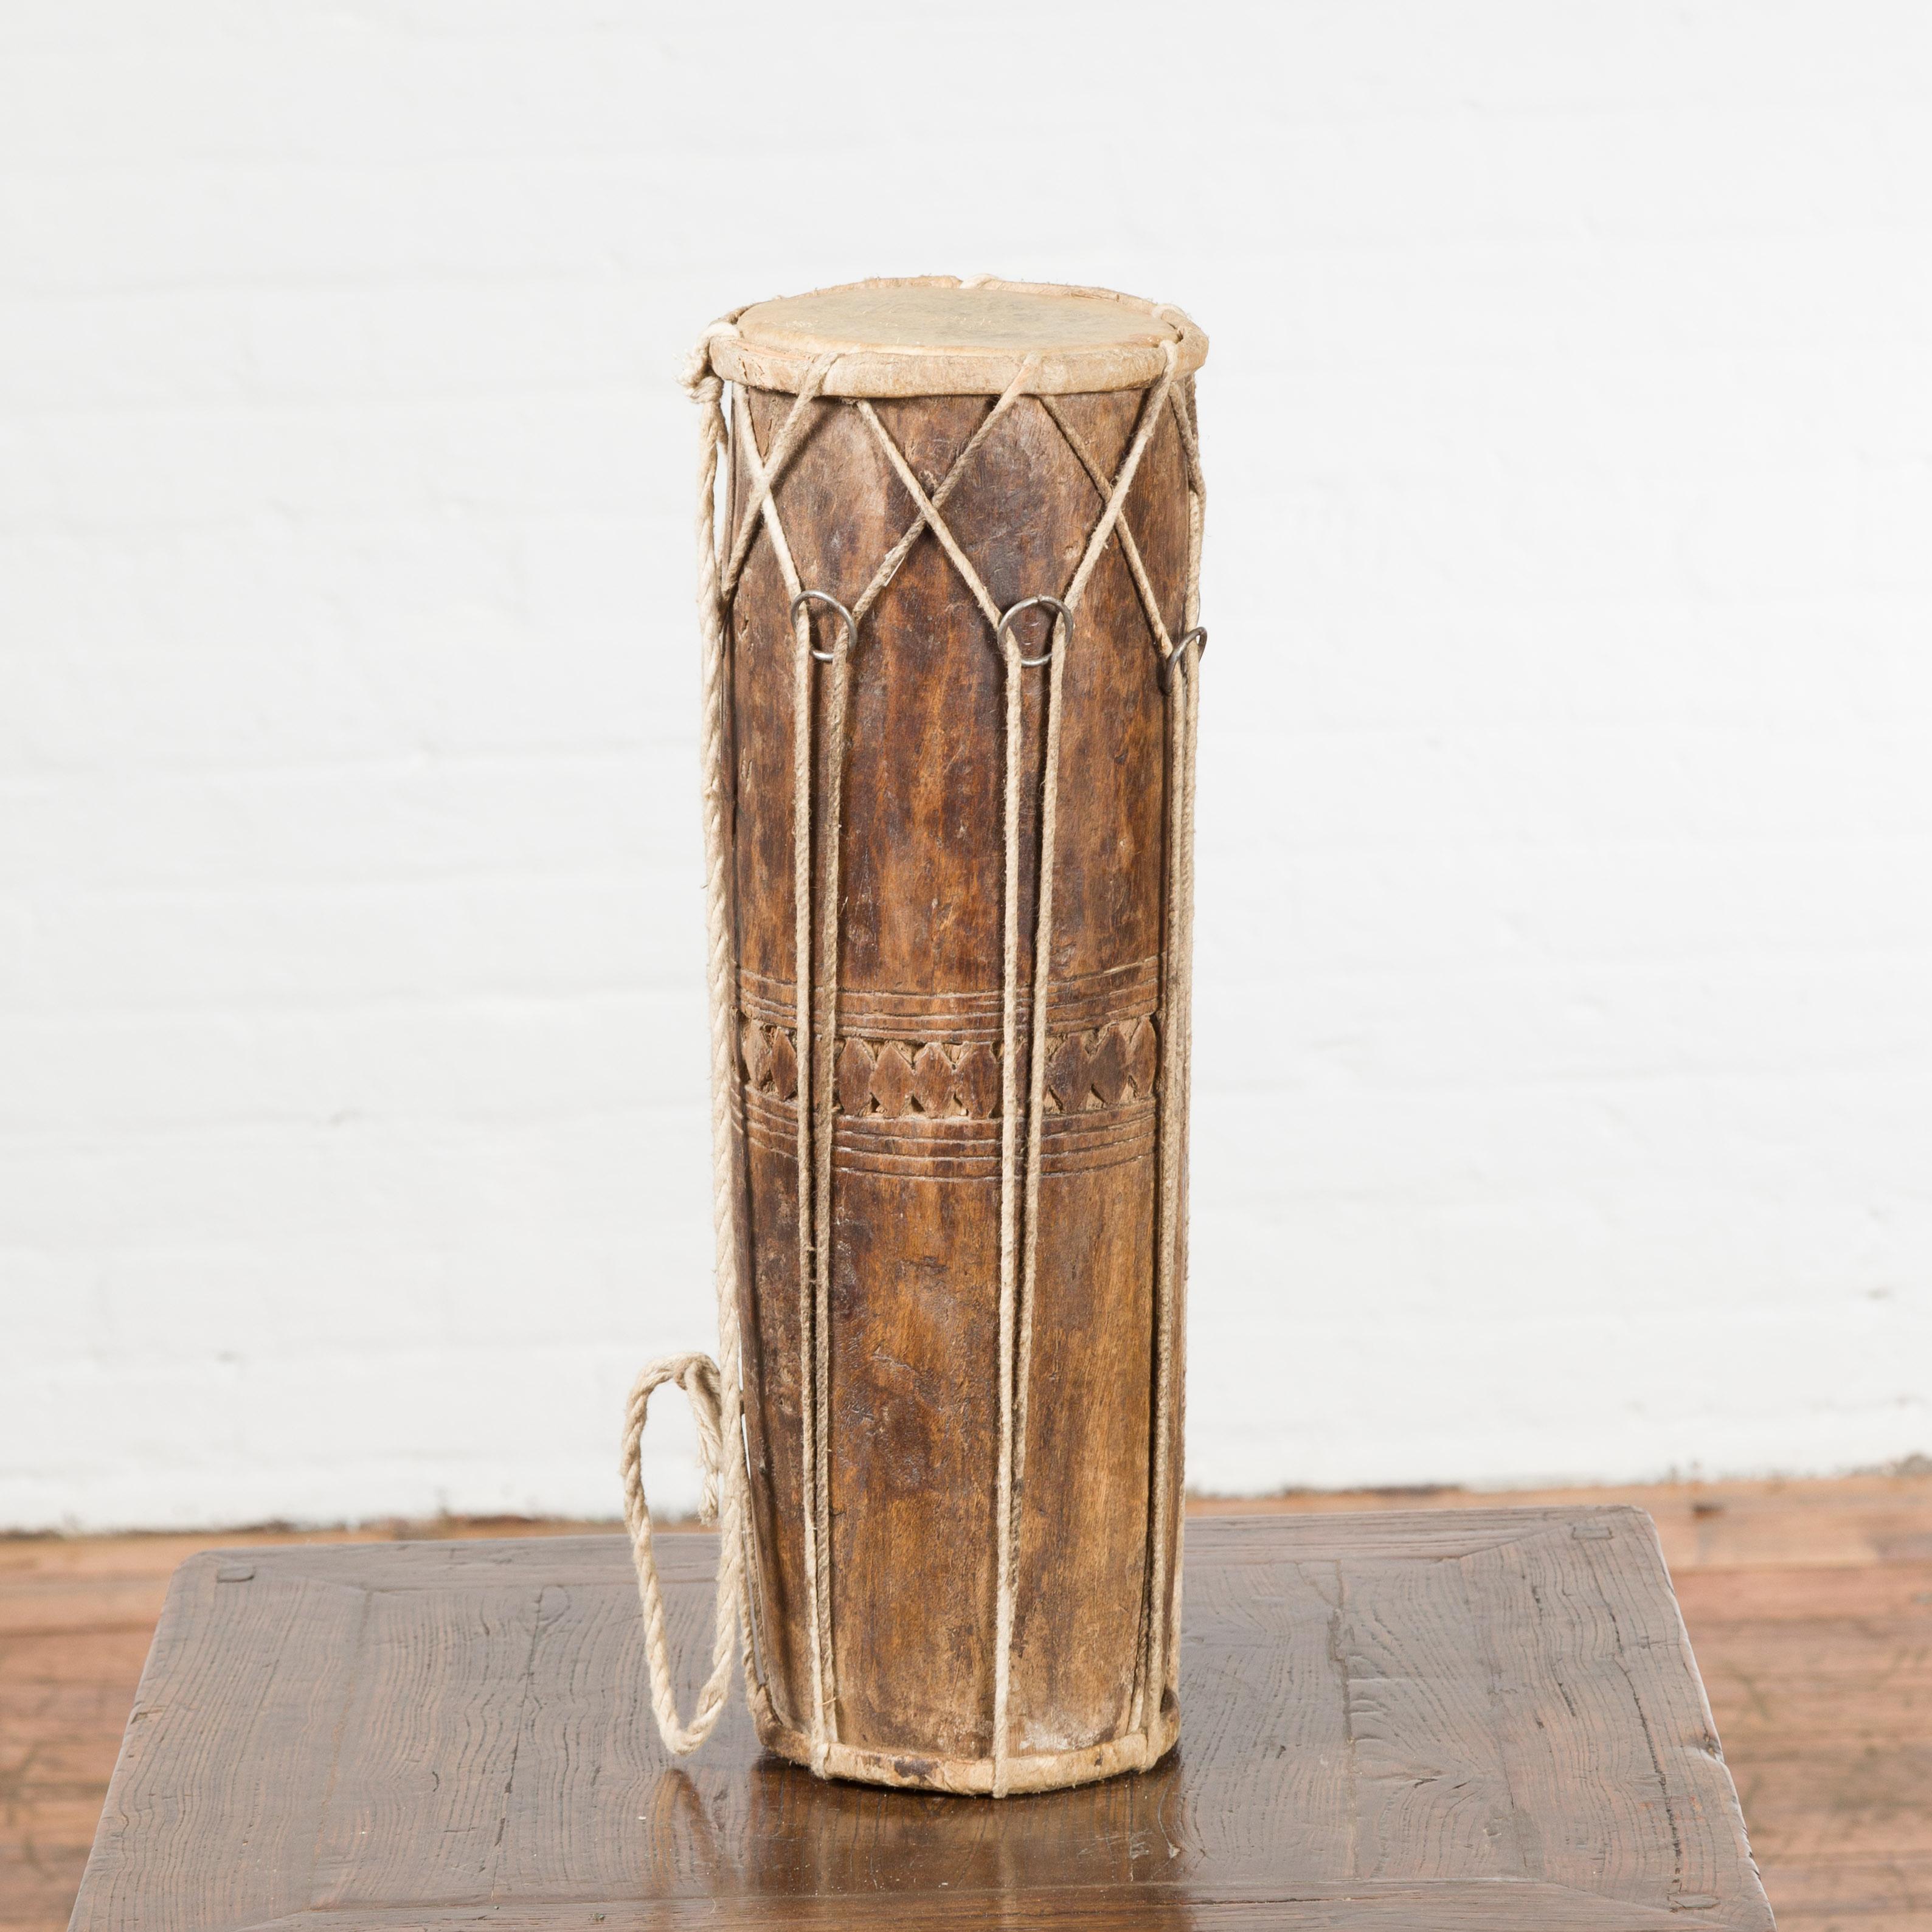 An antique Northern Thai wooden ceremonial drum from the 19th century, with leather drumhead. Sculptural and freestanding, this 19th century drum, created in Northern Thailand, will make for a great decorative accentuation in any home. Topped with a